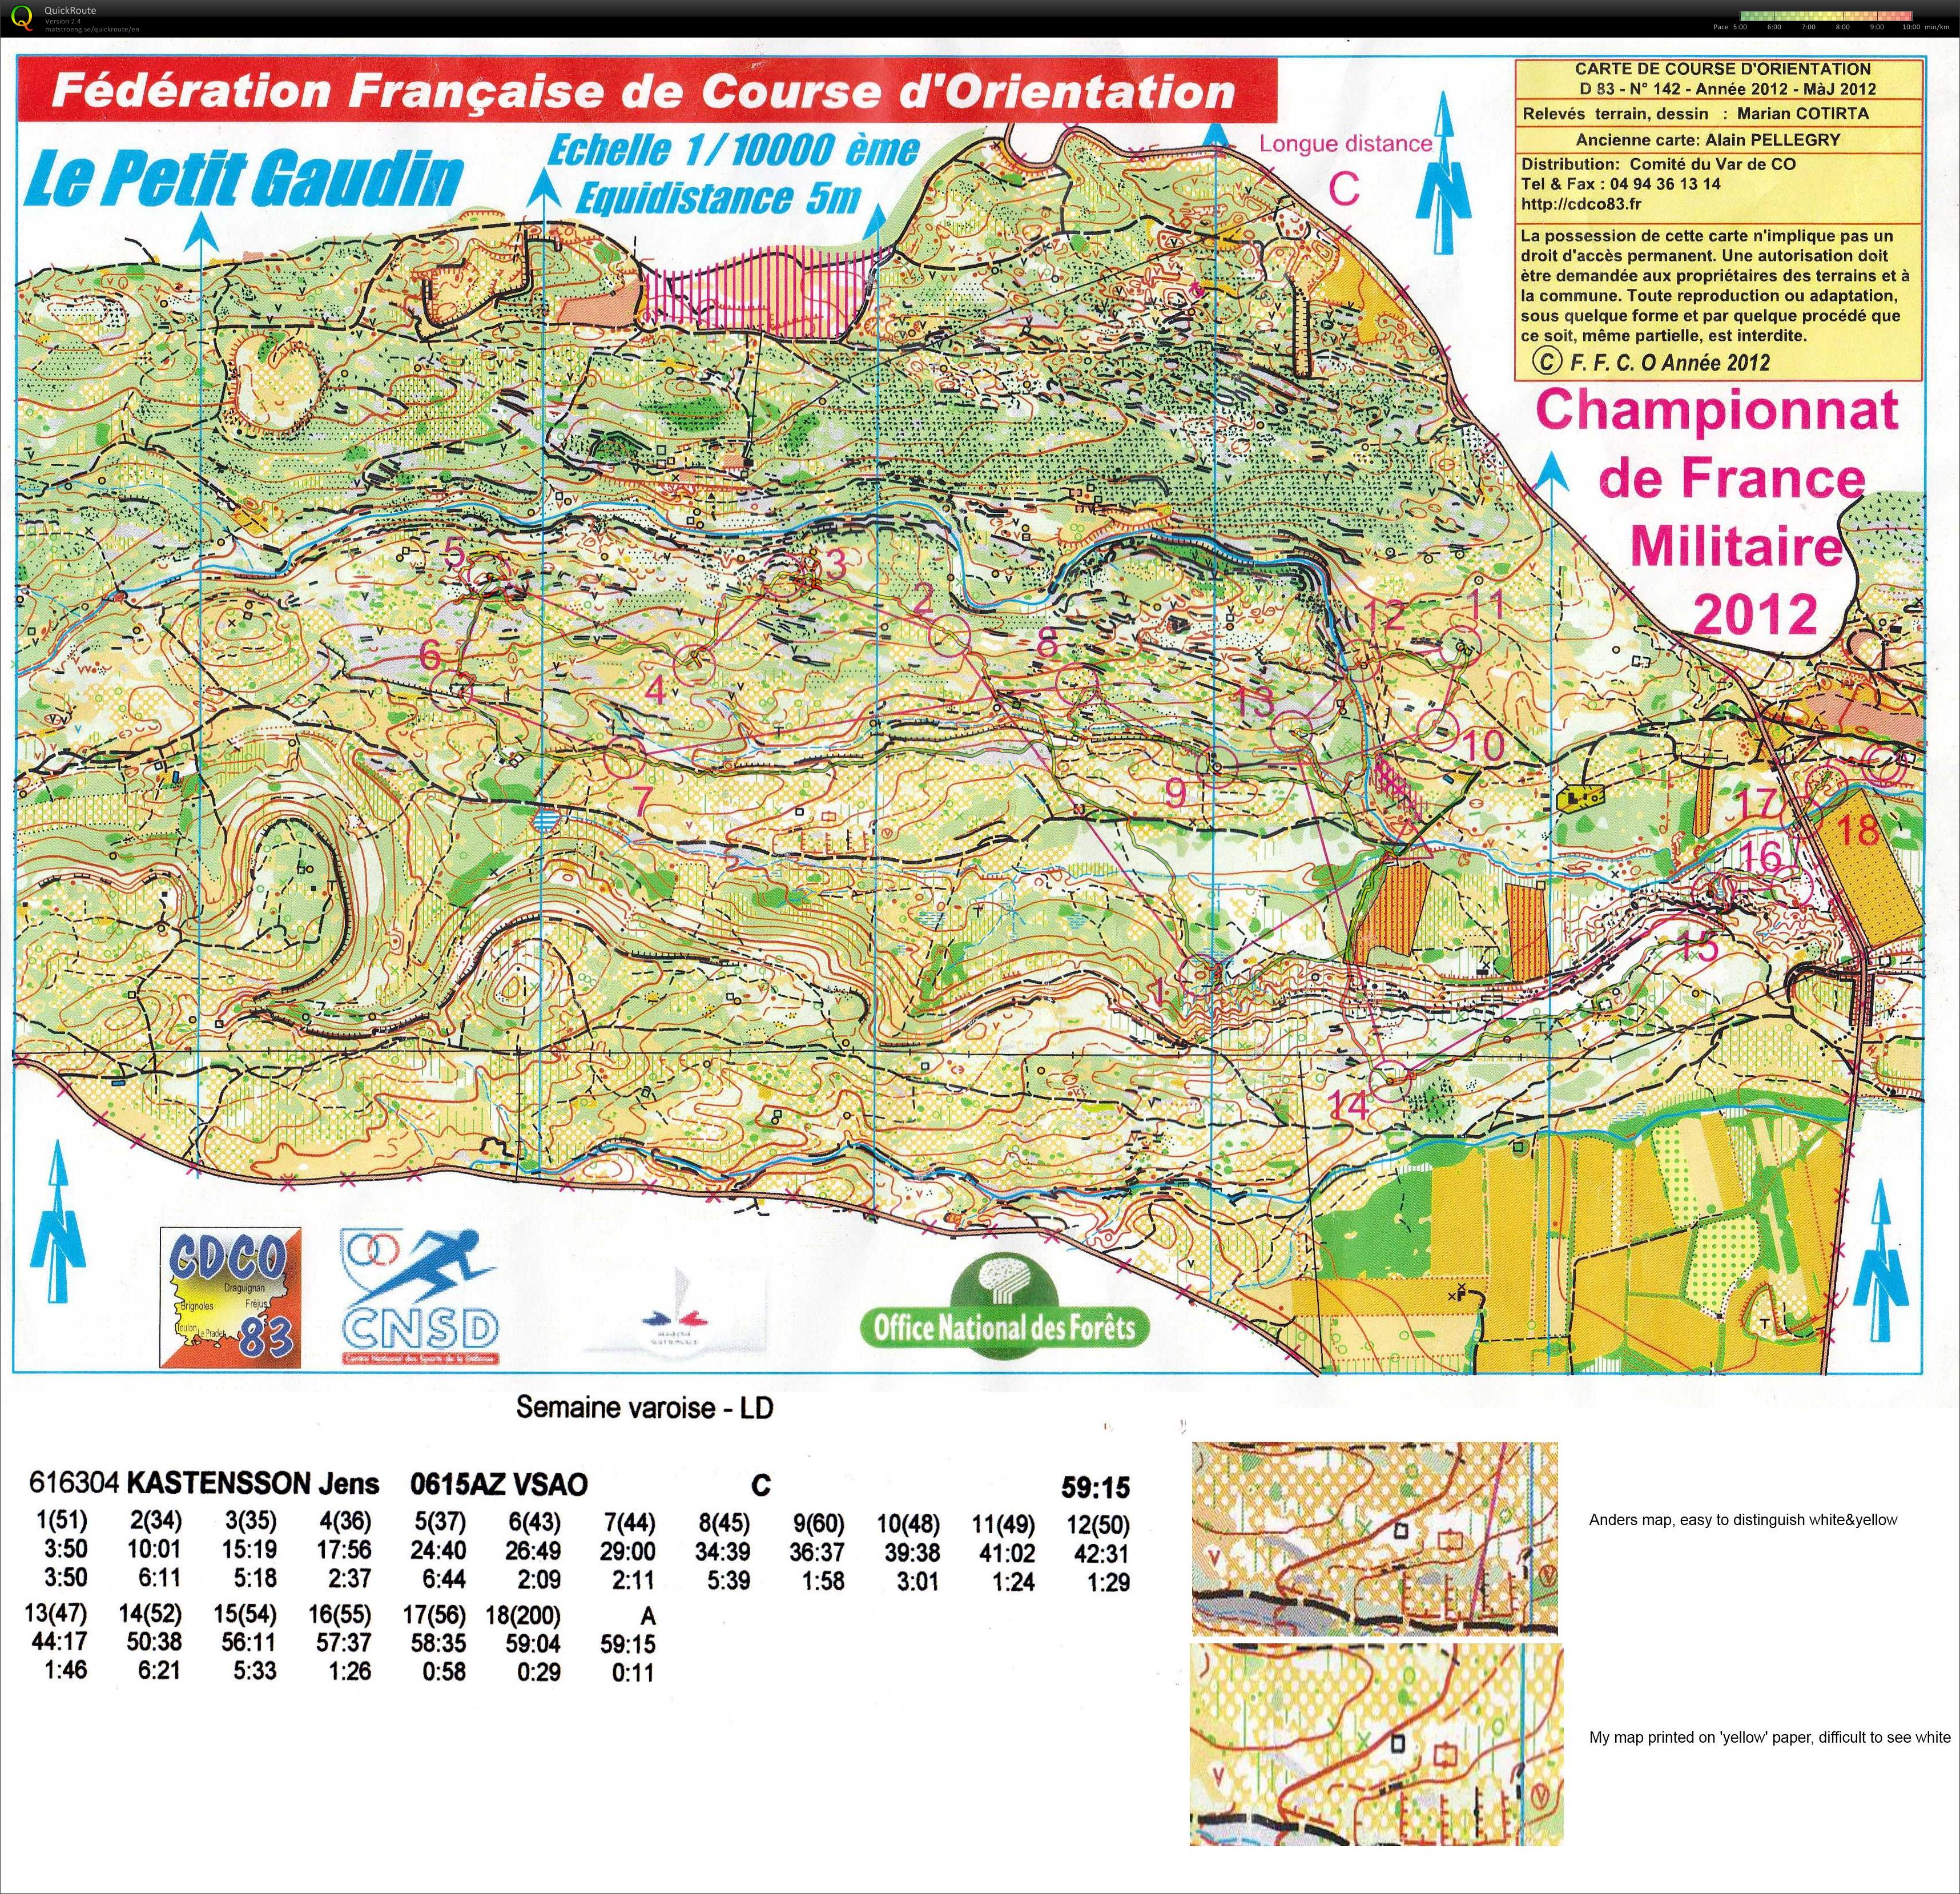 Open race after French Military long distance champs H50 (11-05-2012)